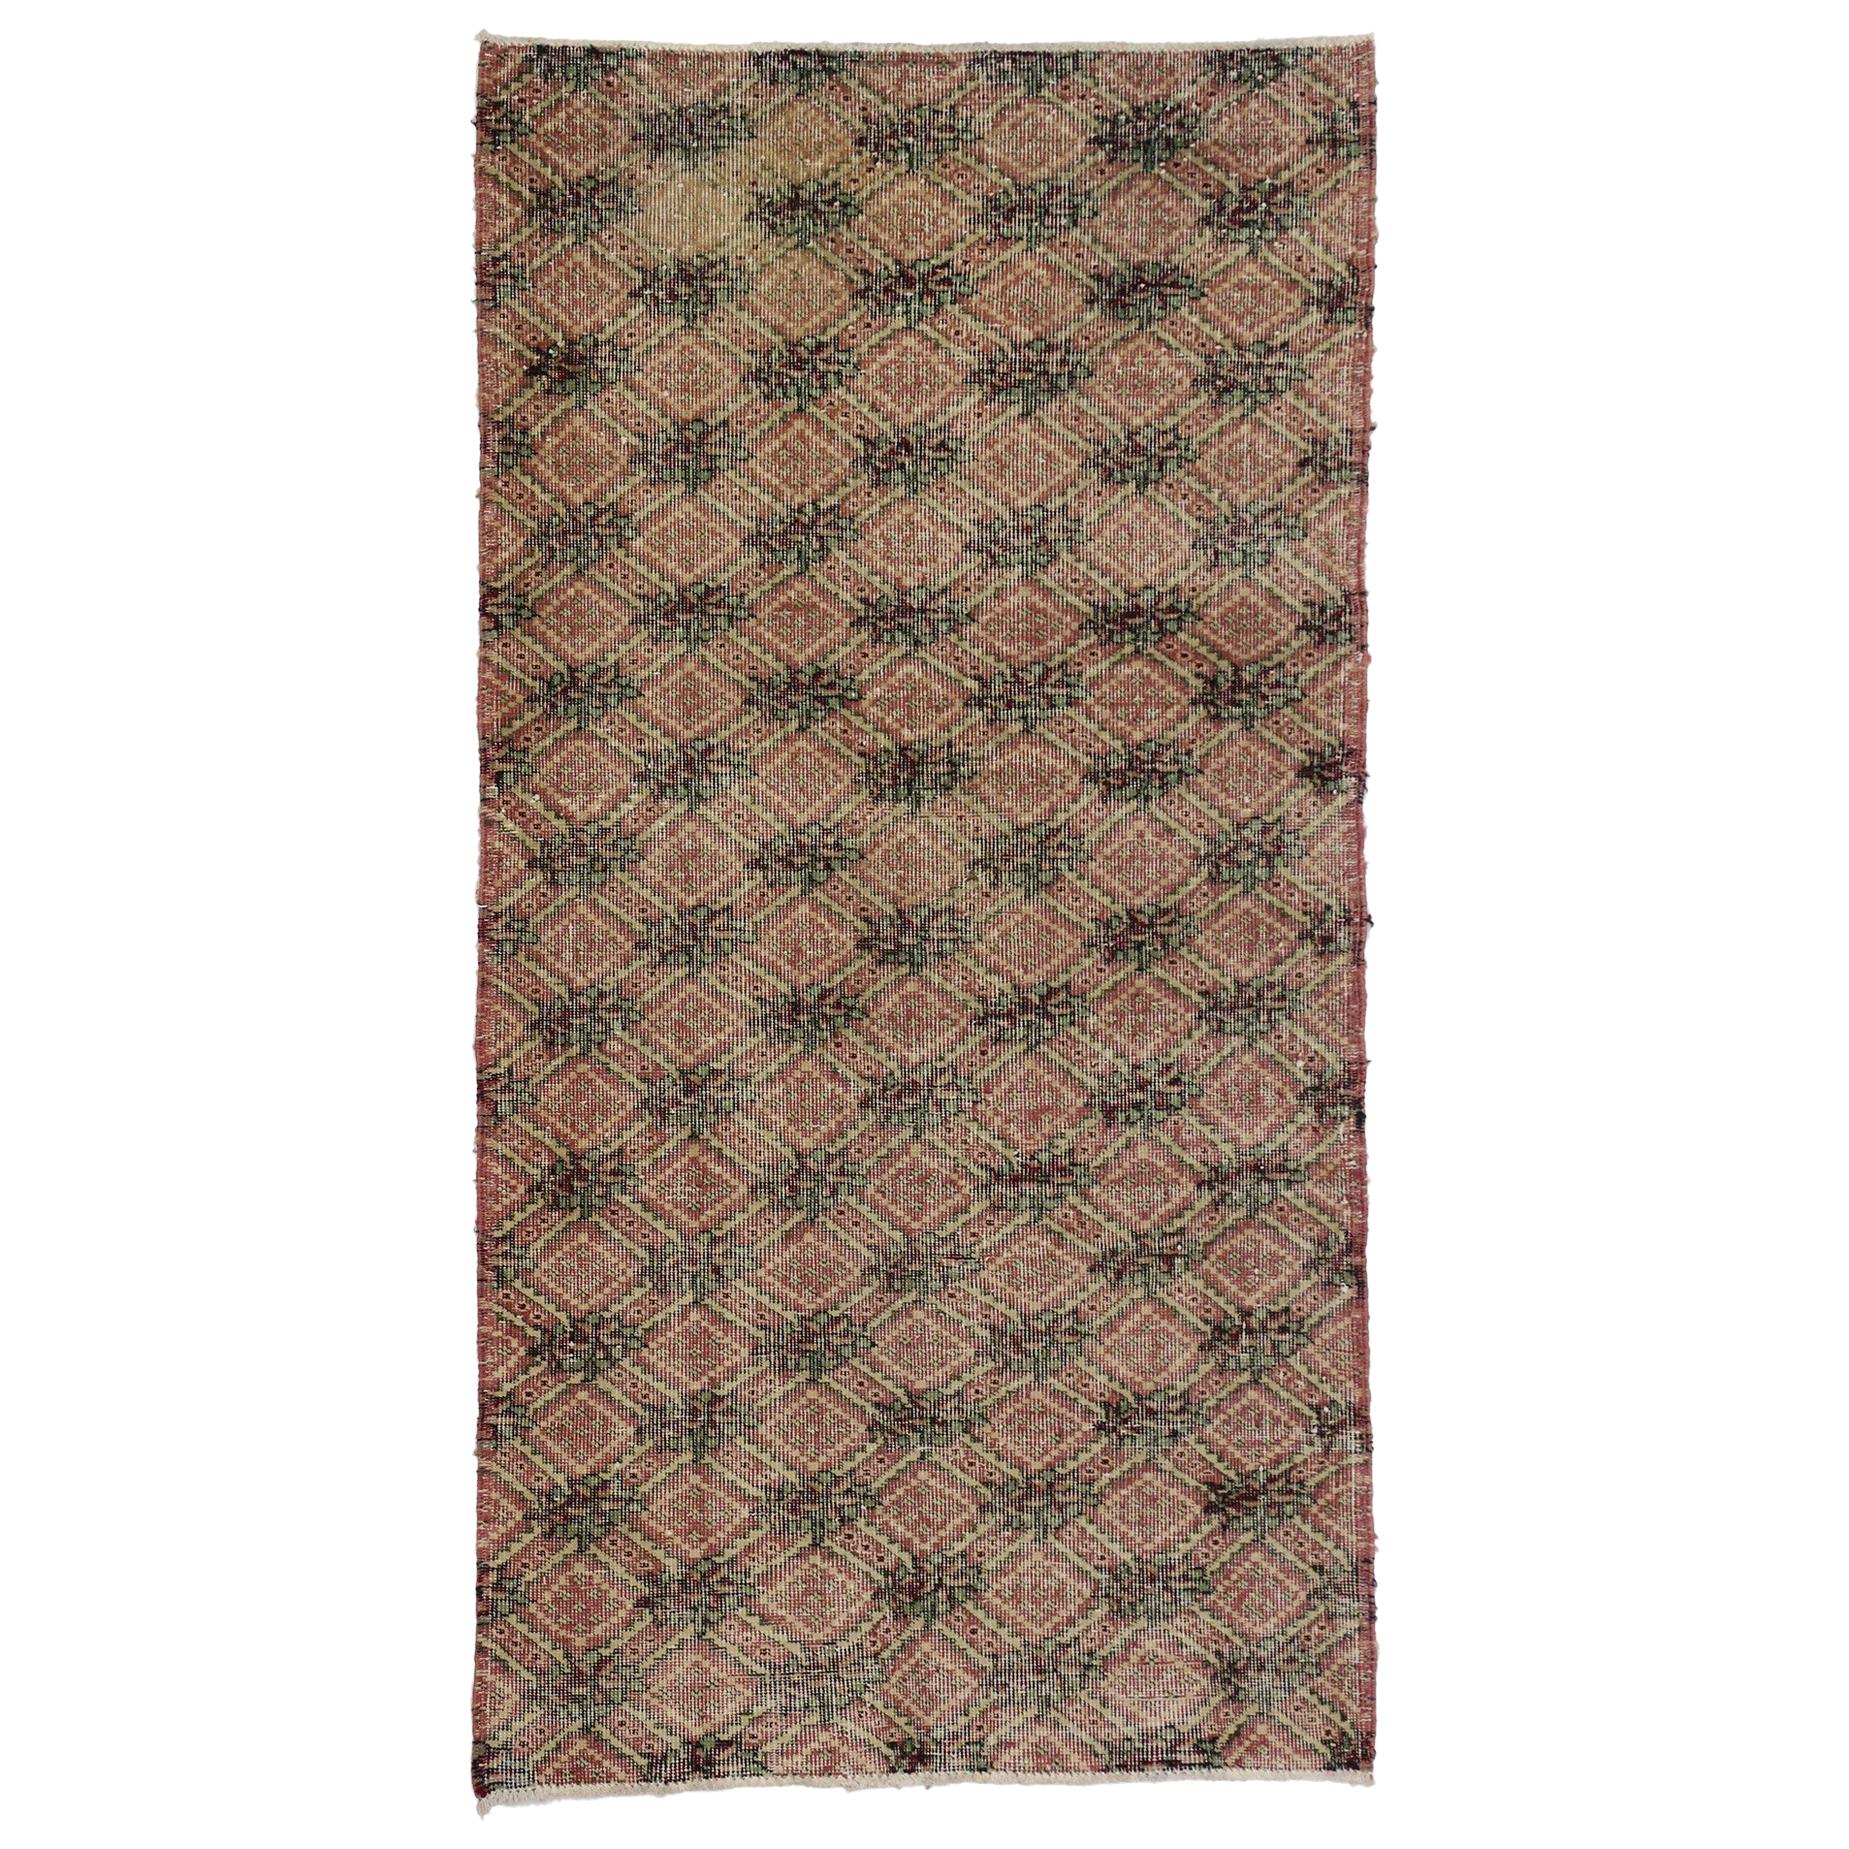 Distressed Vintage Turkish Sivas Rug with English Country Farmhouse Style